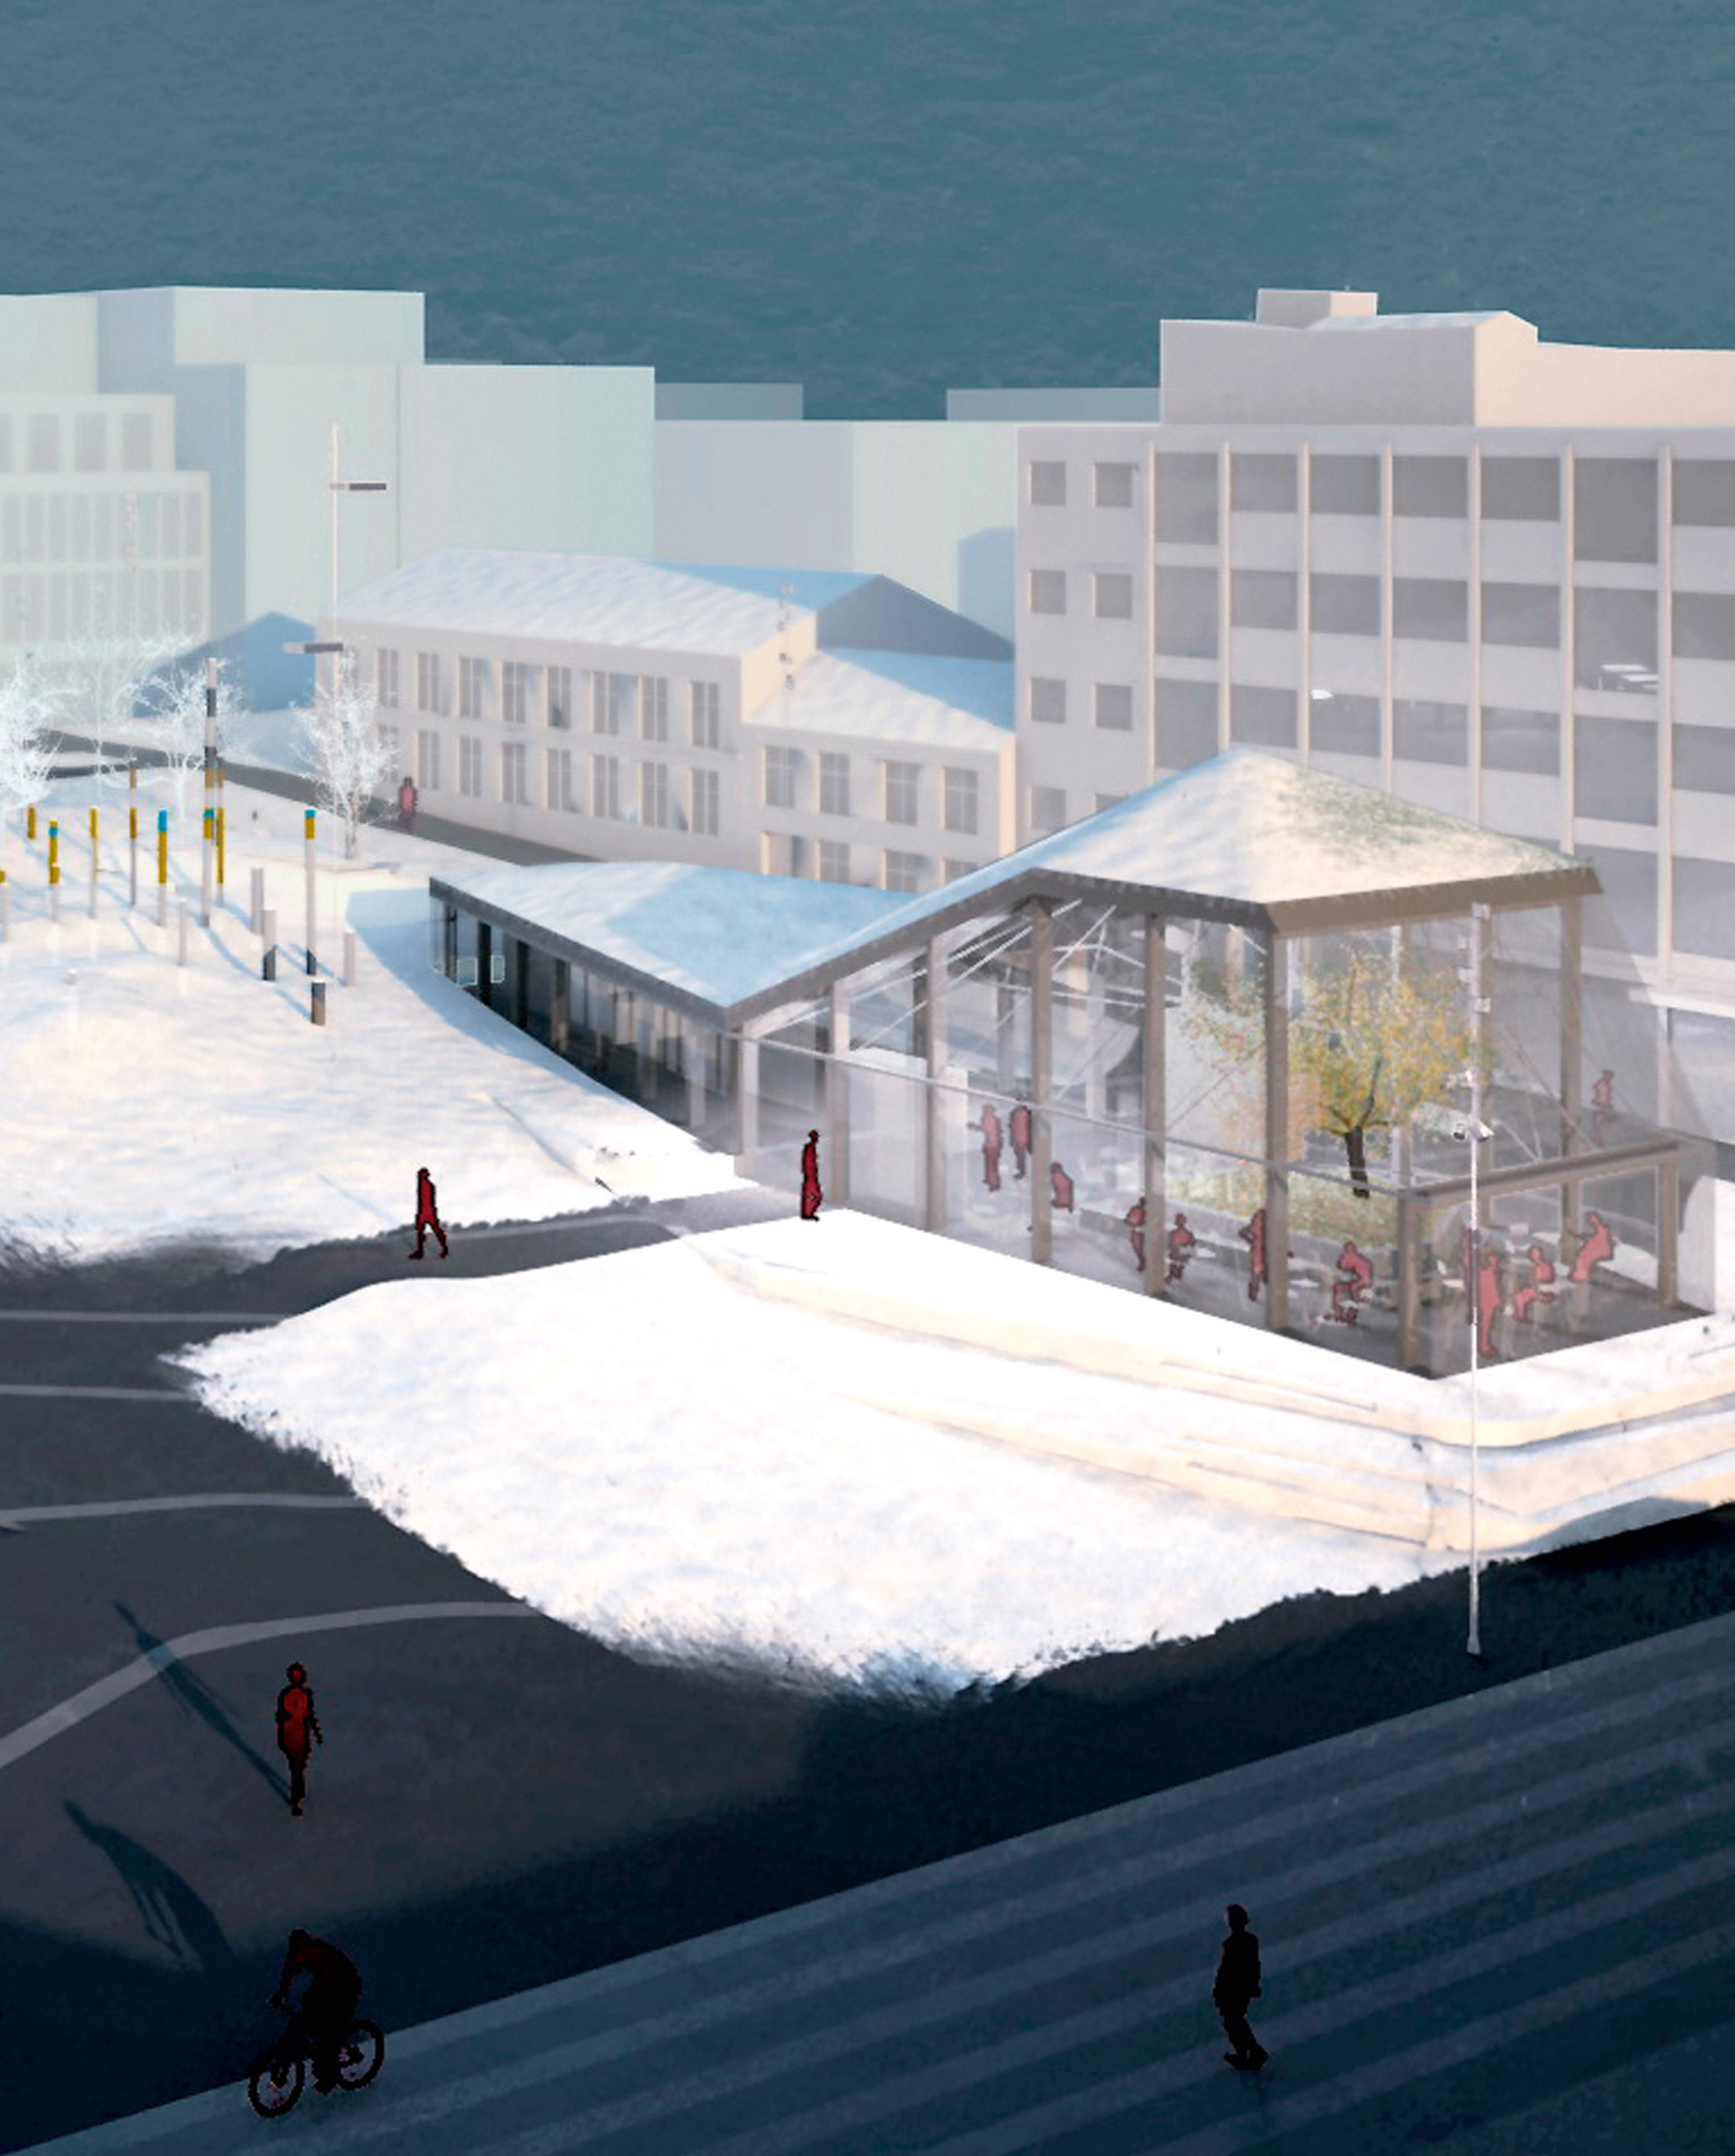 Dreamhamar Project on Stortorget Square